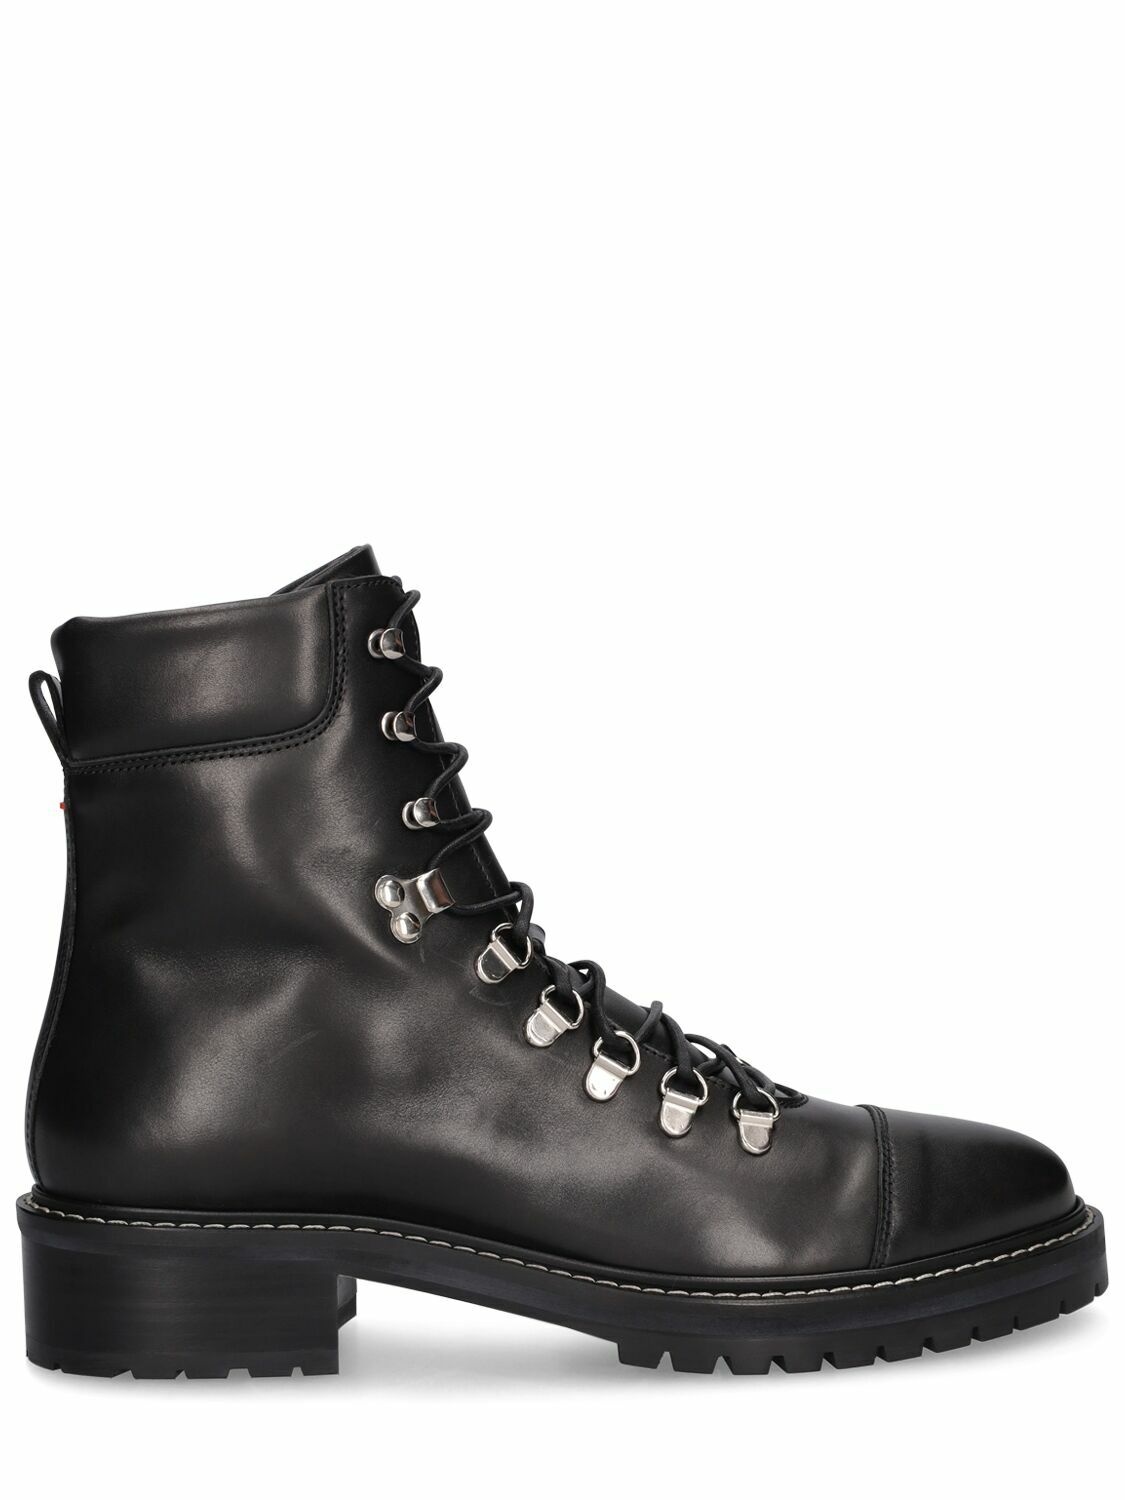 Photo: AEYDE - 45mm Fiona Leather Hiking Boots